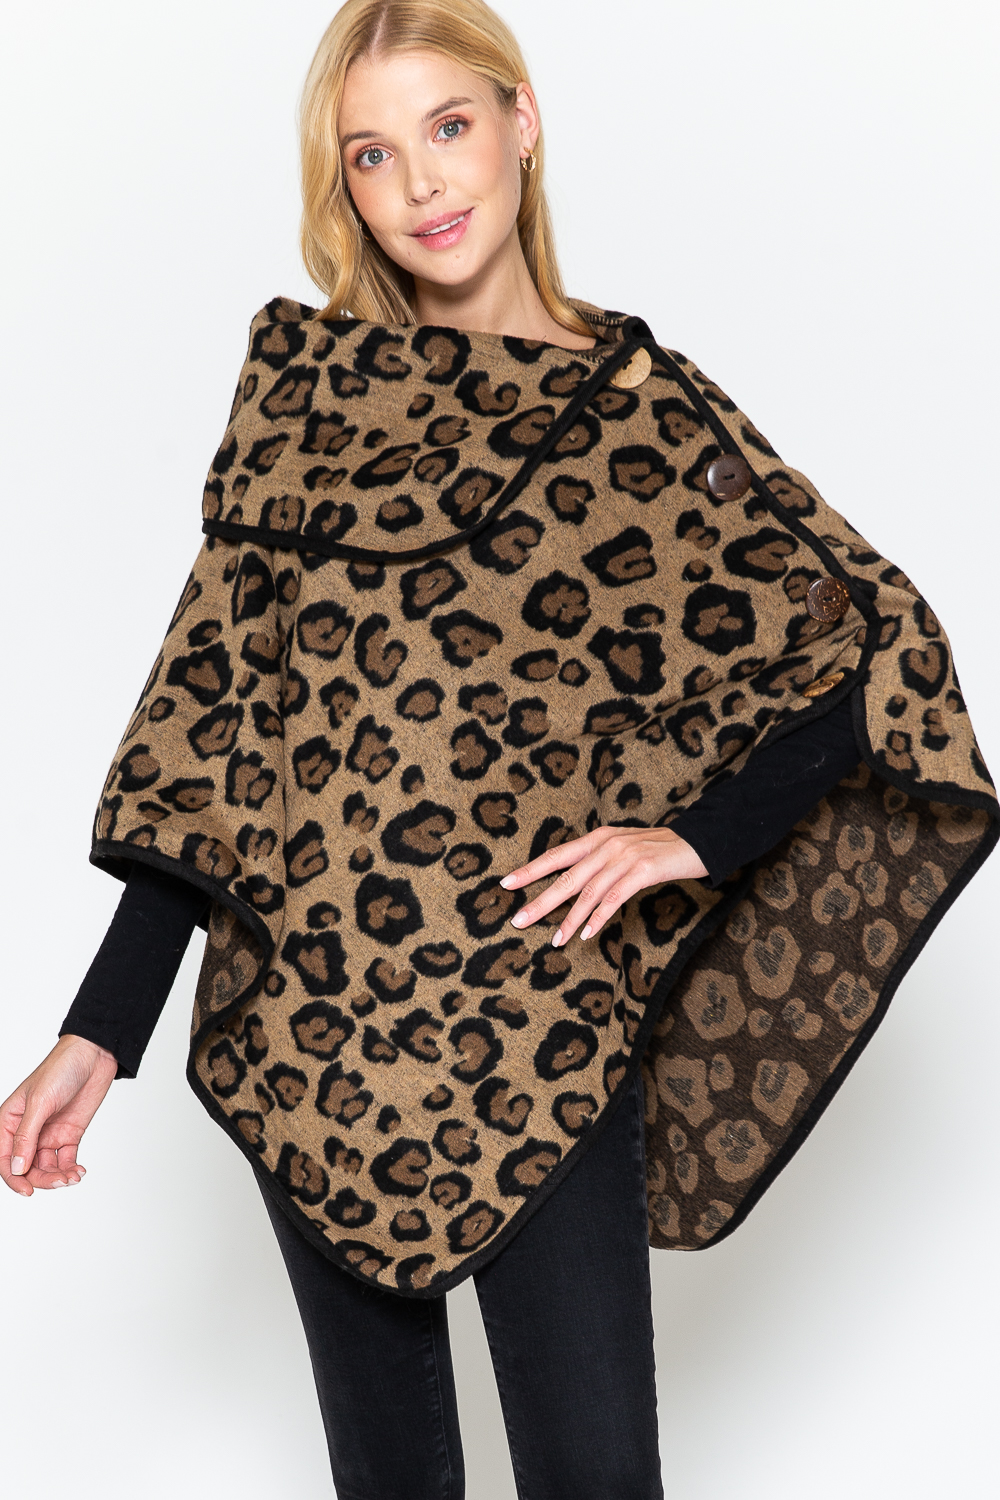 Leopard Print Poncho, Buttoned Collar, Stay warm and hip